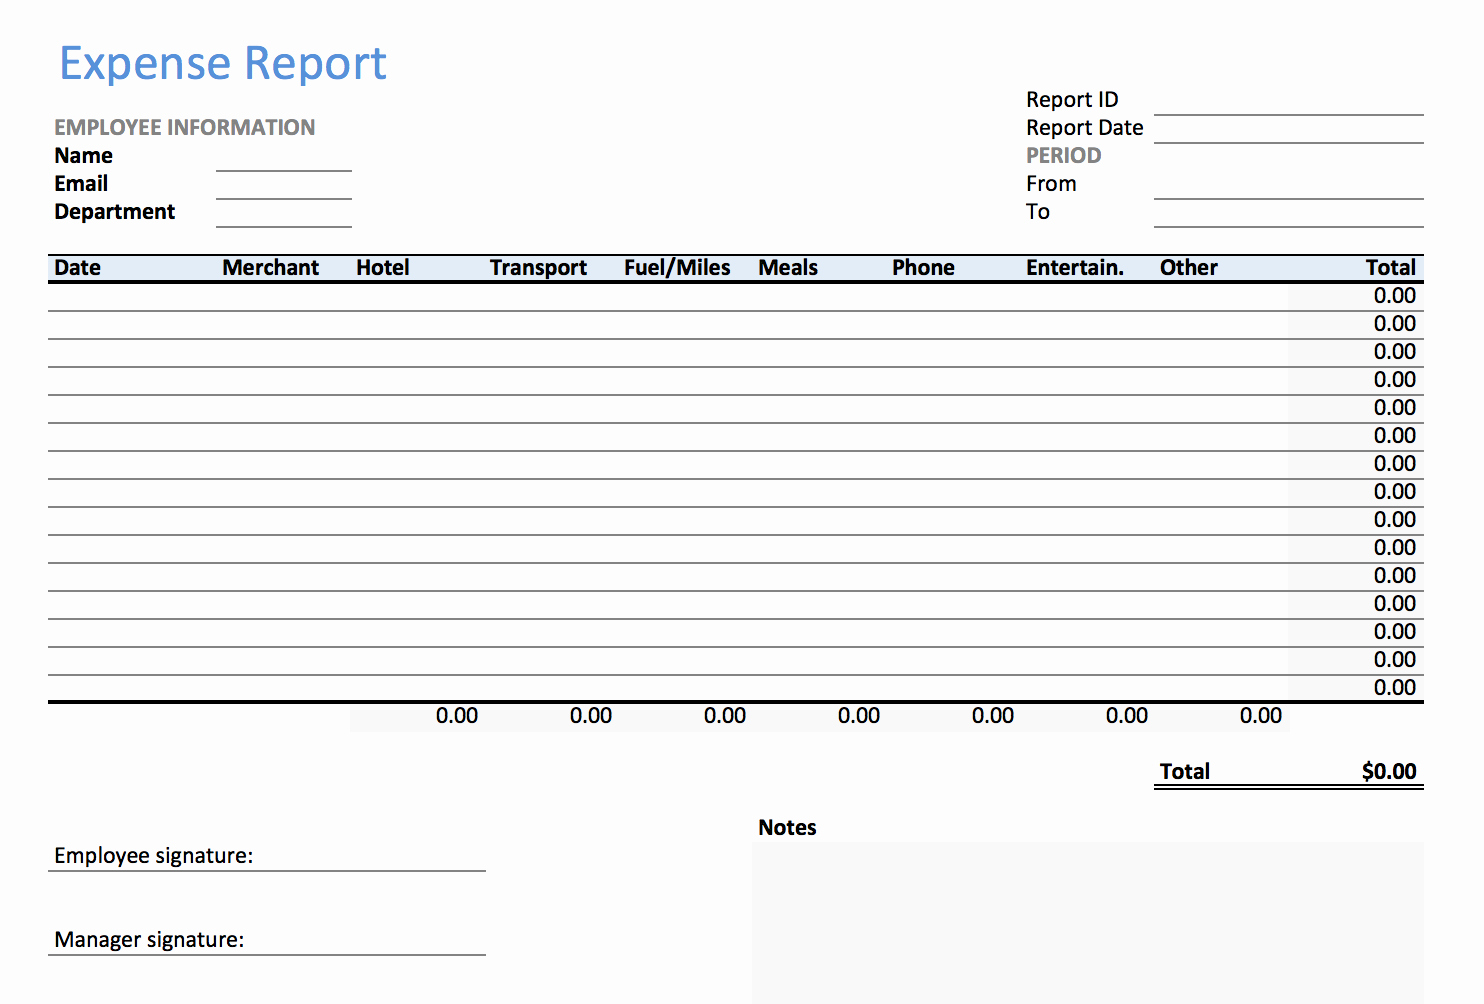 Monthly Expense Report Template Excel Awesome Simple Monthly Expense Report Template for Excel Semi